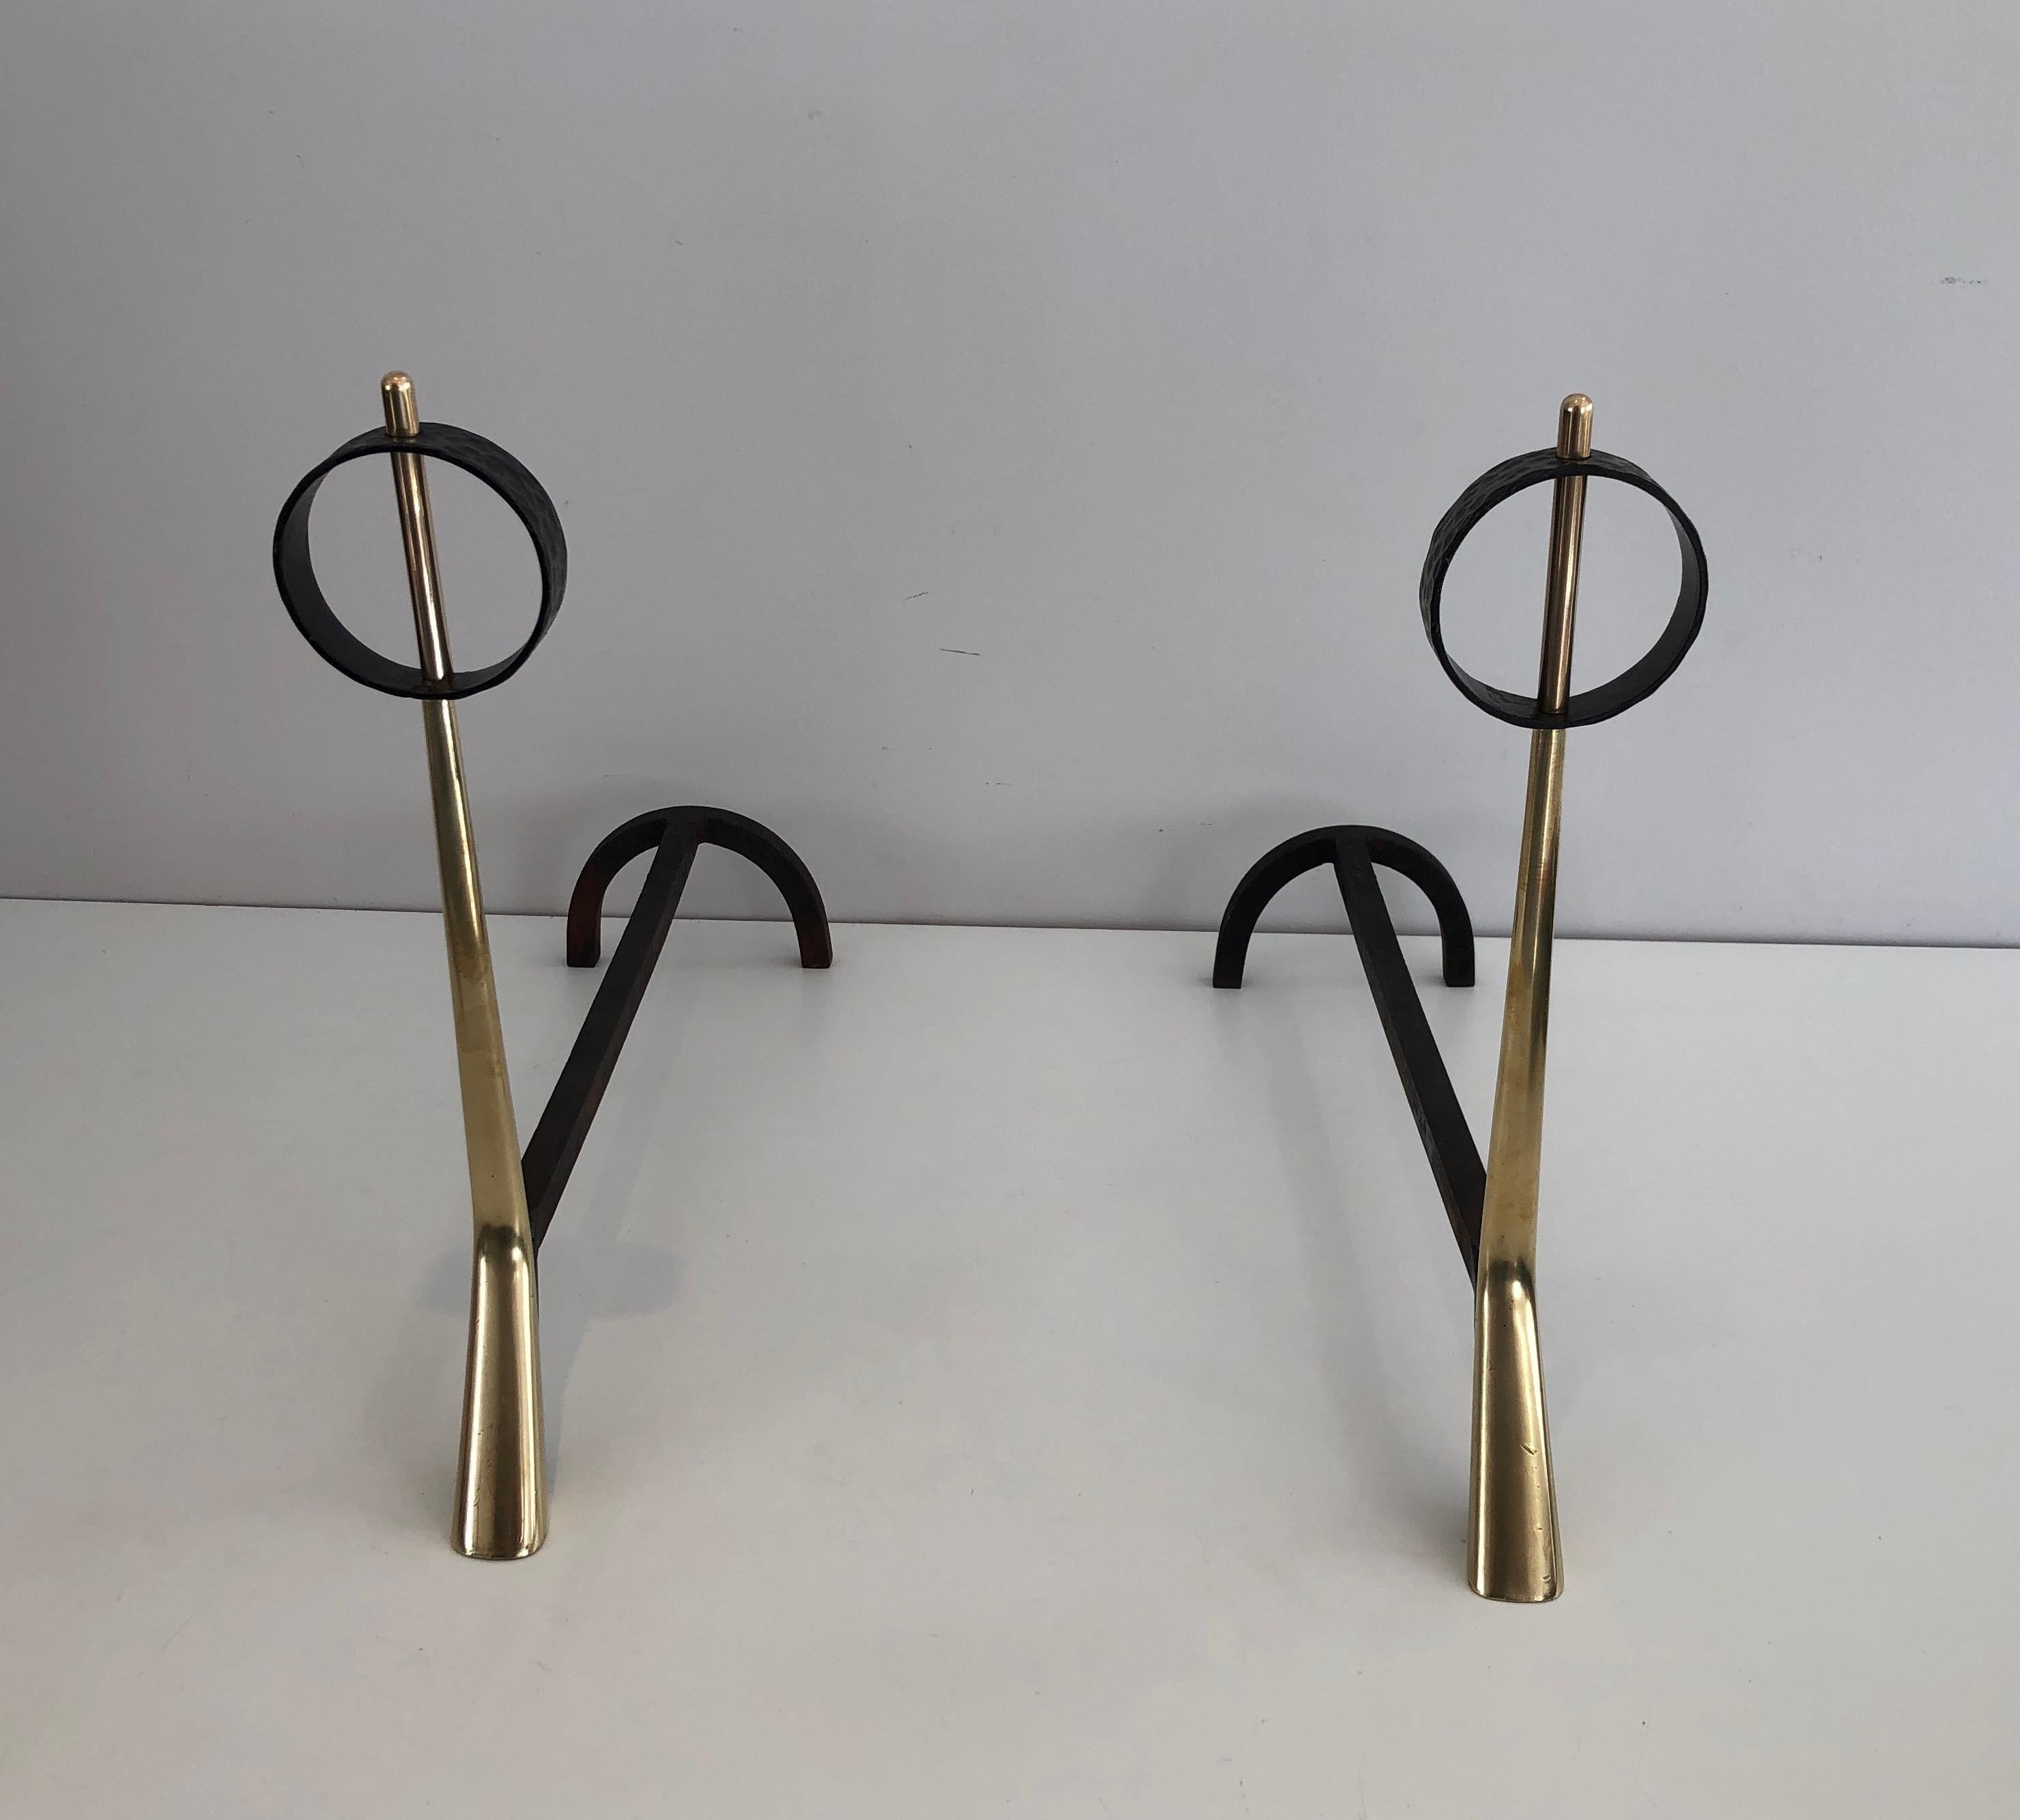 Pair of Modernist Bronze and Wrought Iron Andirons, Italian, circa 1950 For Sale 6